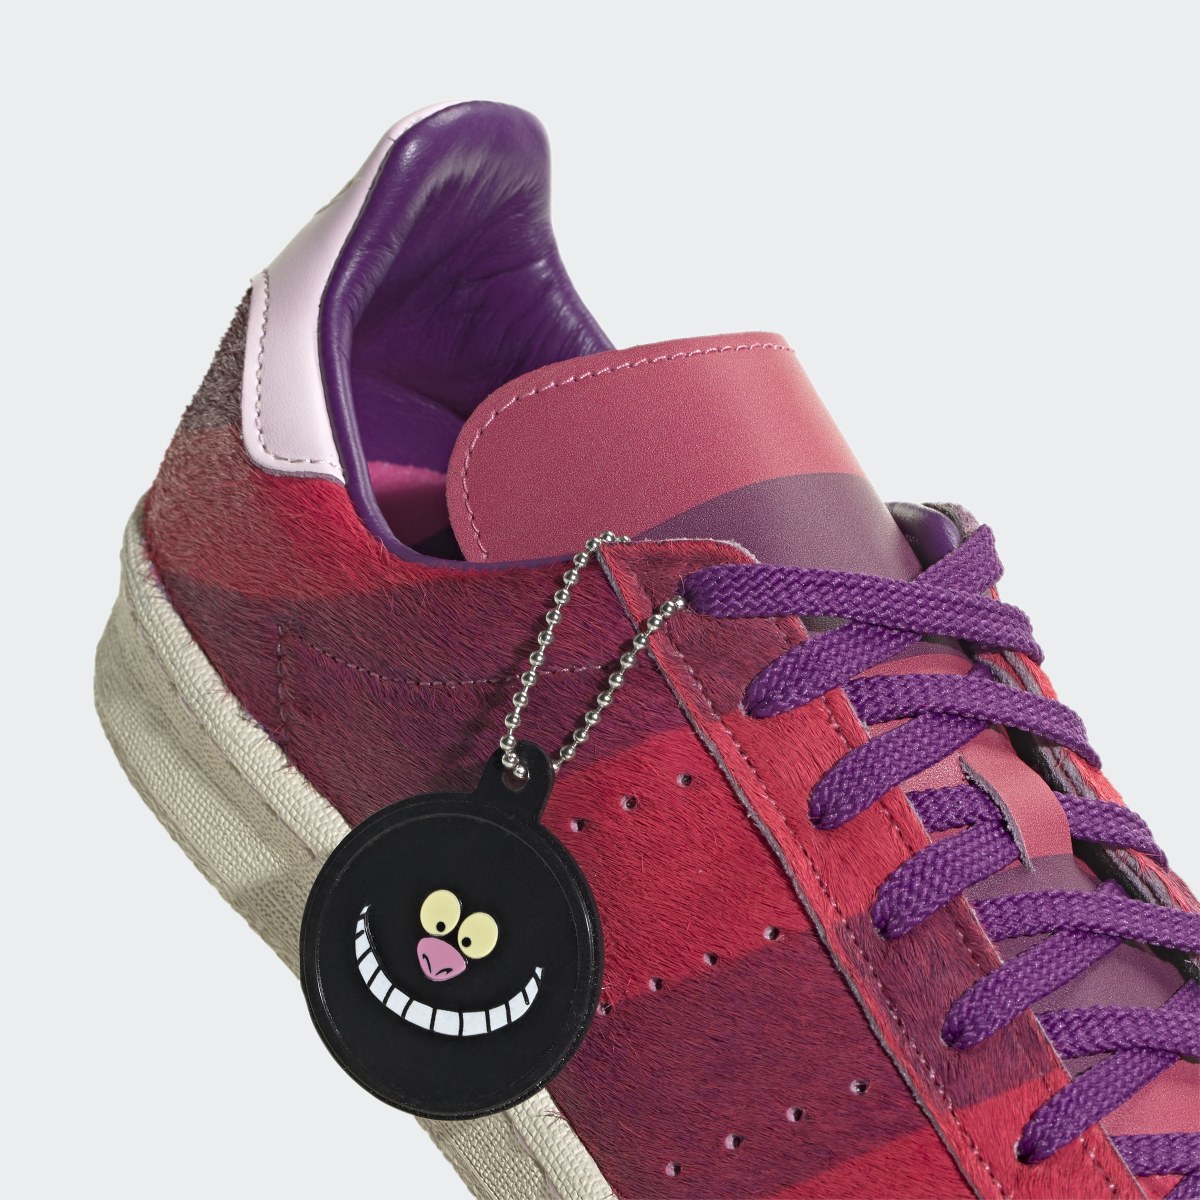 Adidas Campus 80s Cheshire Cat Shoes. 11